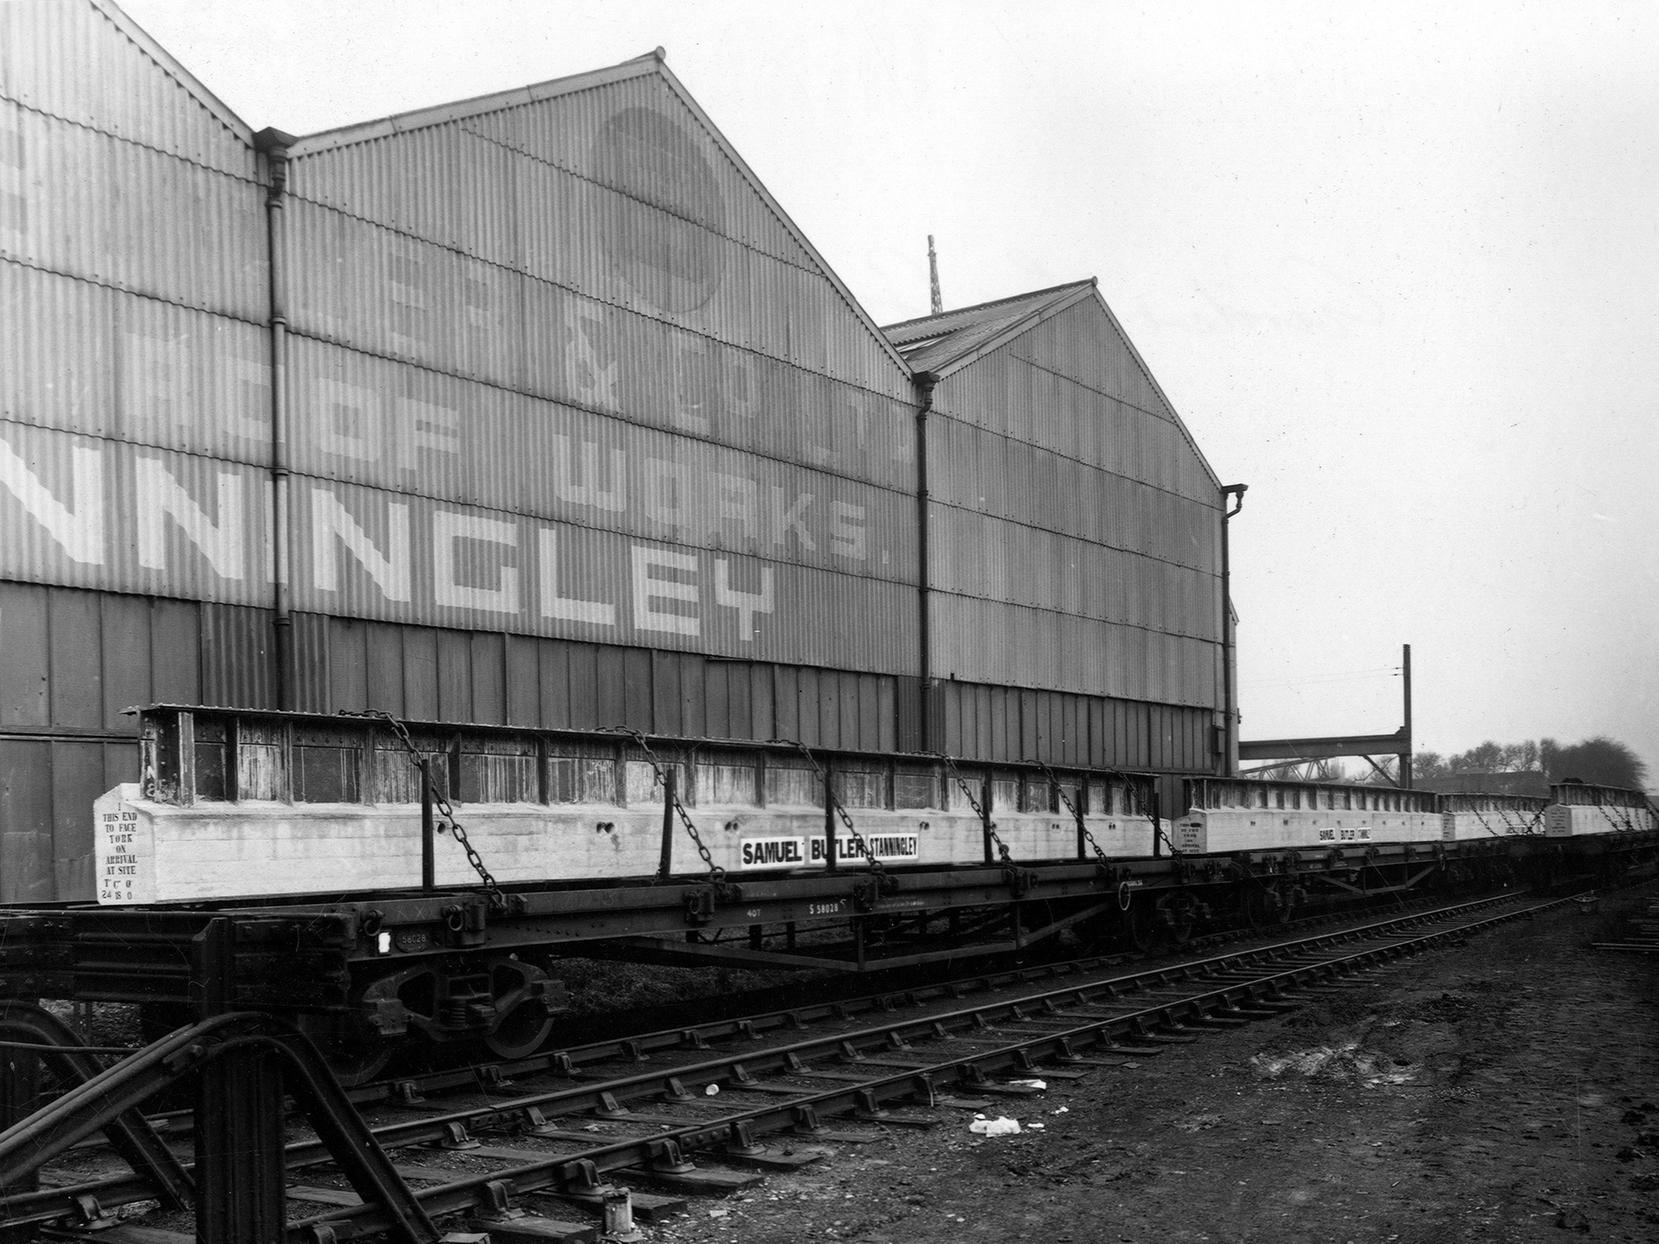 A view of the railway sidings outside Samuel Butler & Co Ltd at their Albion works in Stanningley. The wagons are loaded with bridge girders ready for delivery to the new bridge at Cross Gates.